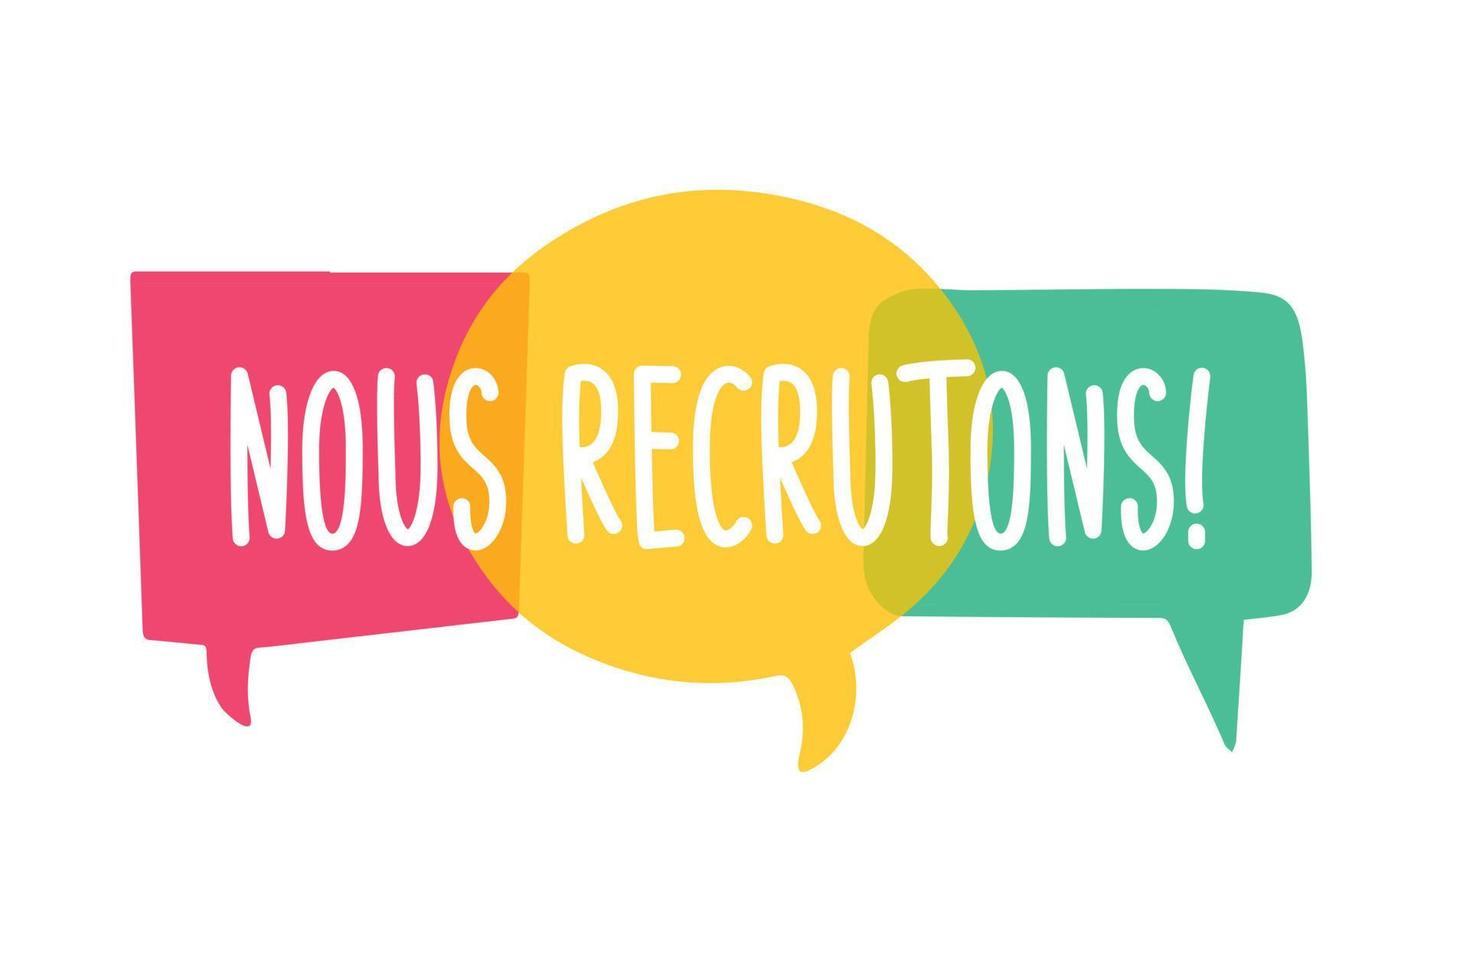 nous recrutons - french translation - We are hiring. Hiring recruitment poster vector design. Text on bright speech bubbles. Vacancy template. Job opening, search